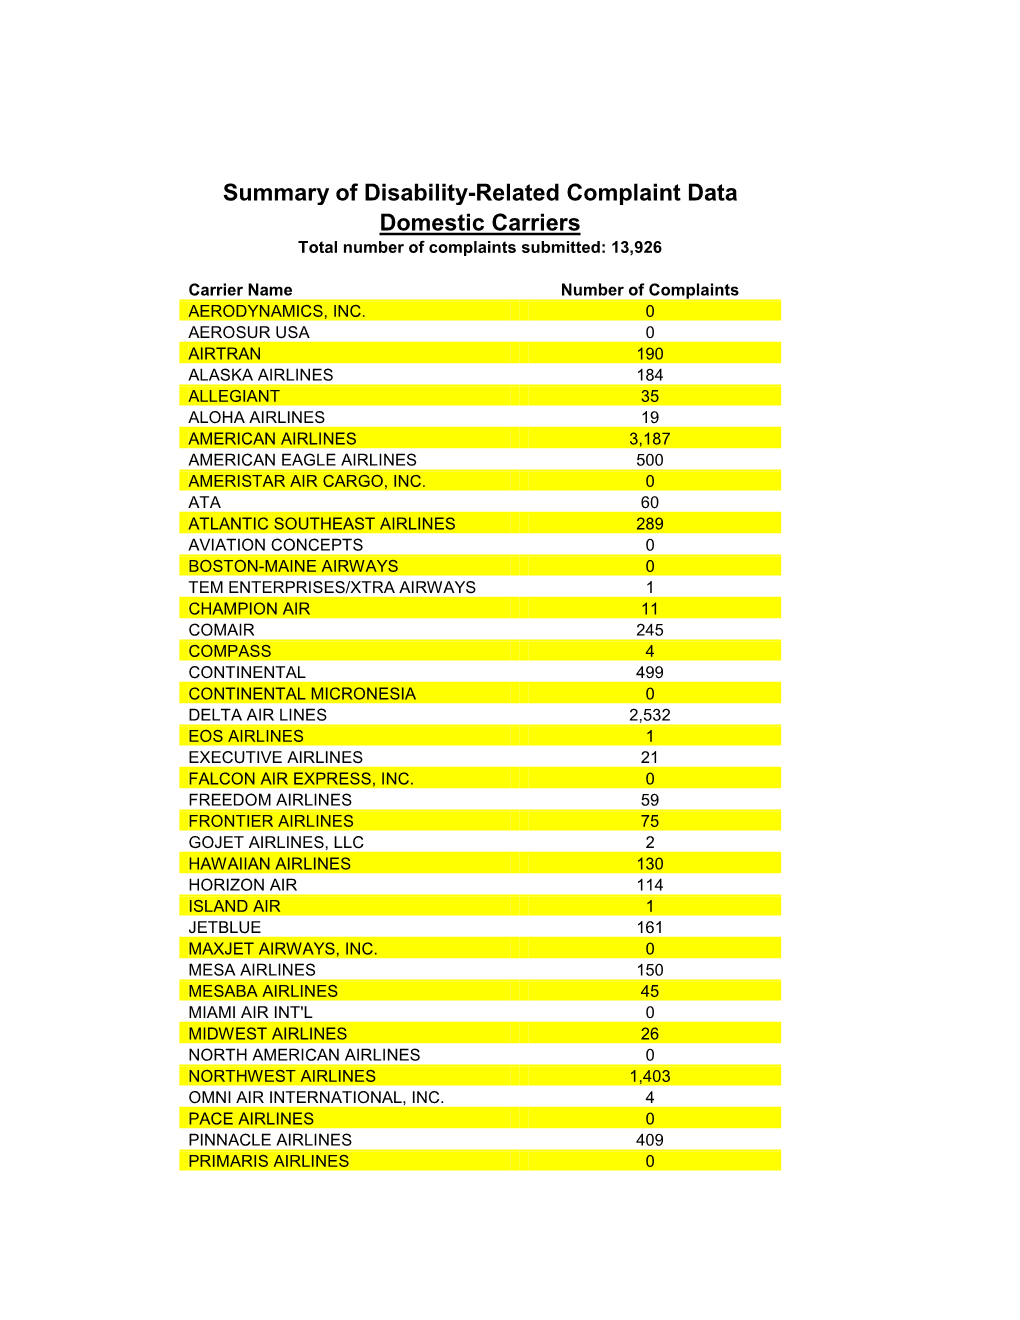 Summary of Disability-Related Complaint Data Domestic Carriers Total Number of Complaints Submitted: 13,926